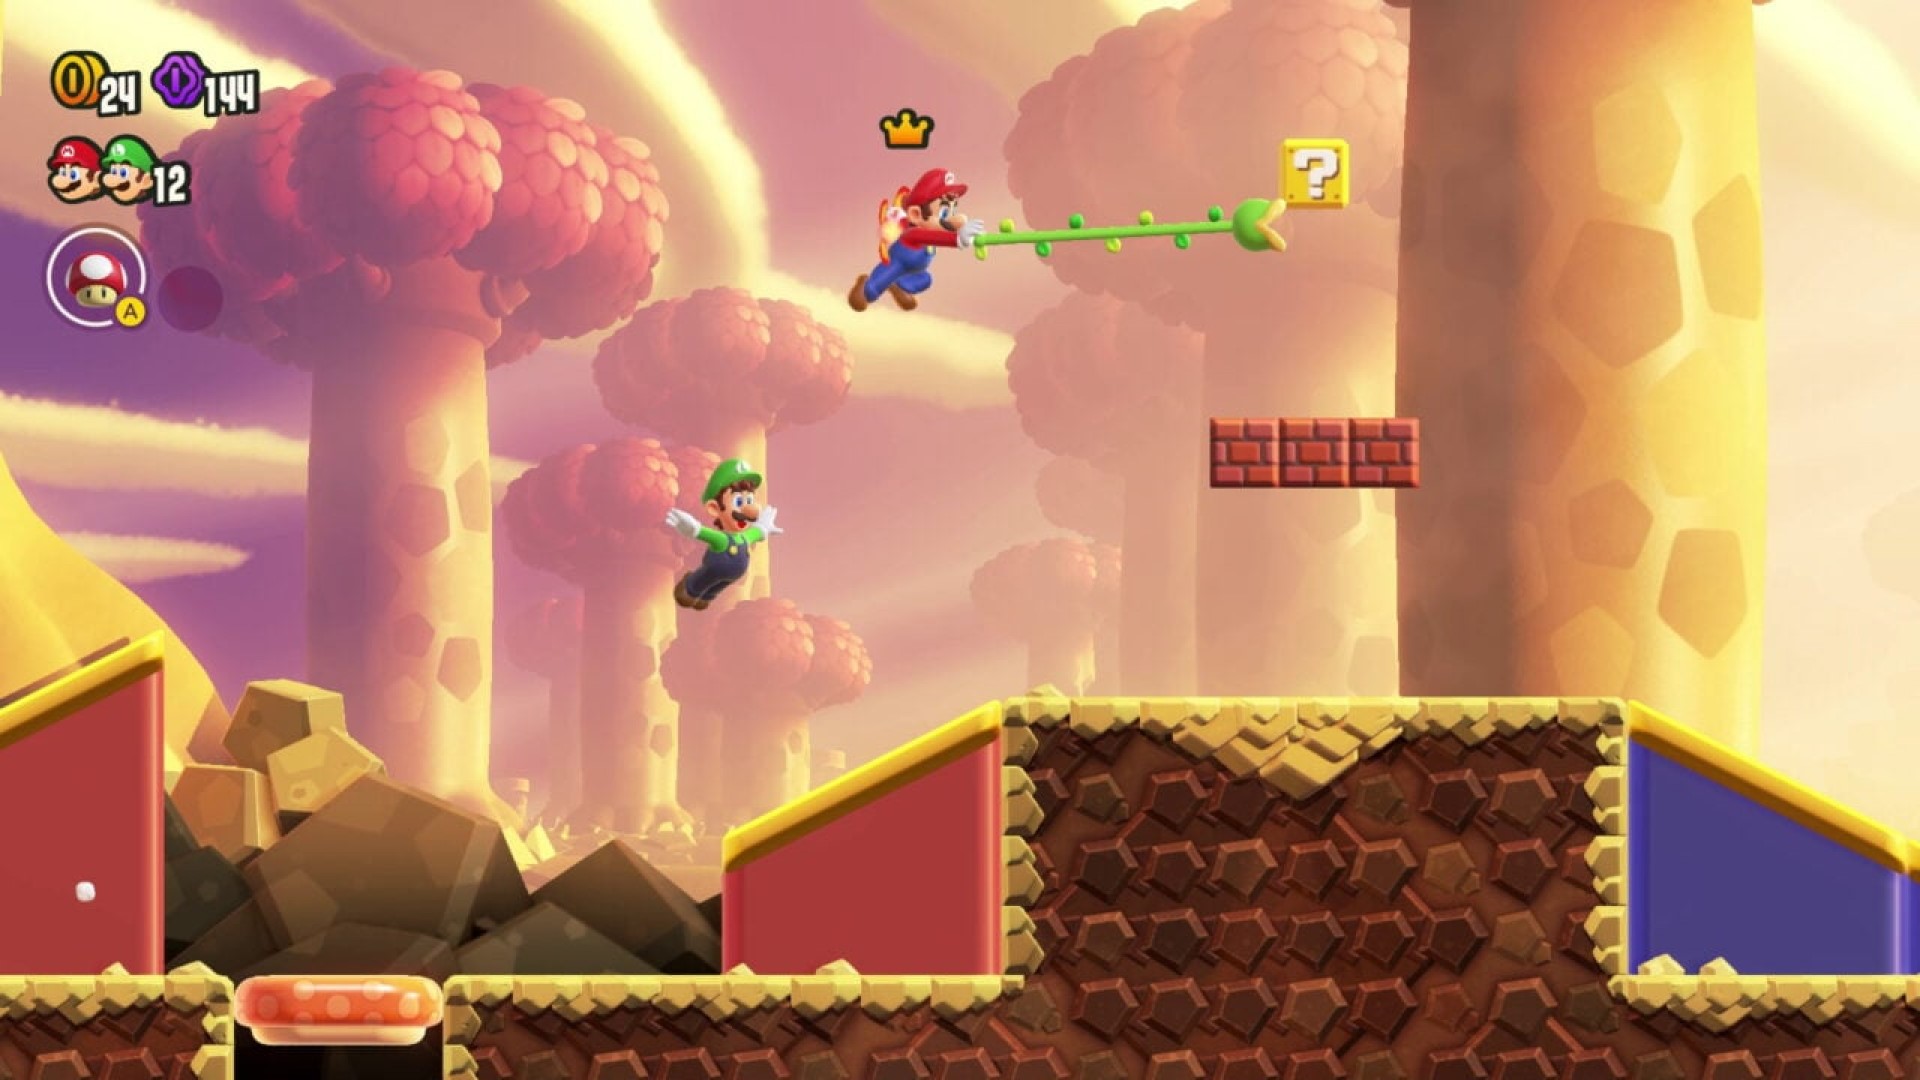 Super Mario Bros. Wonder Showcases Power-ups, Badges, Co-op, and More in Extensive New Gameplay